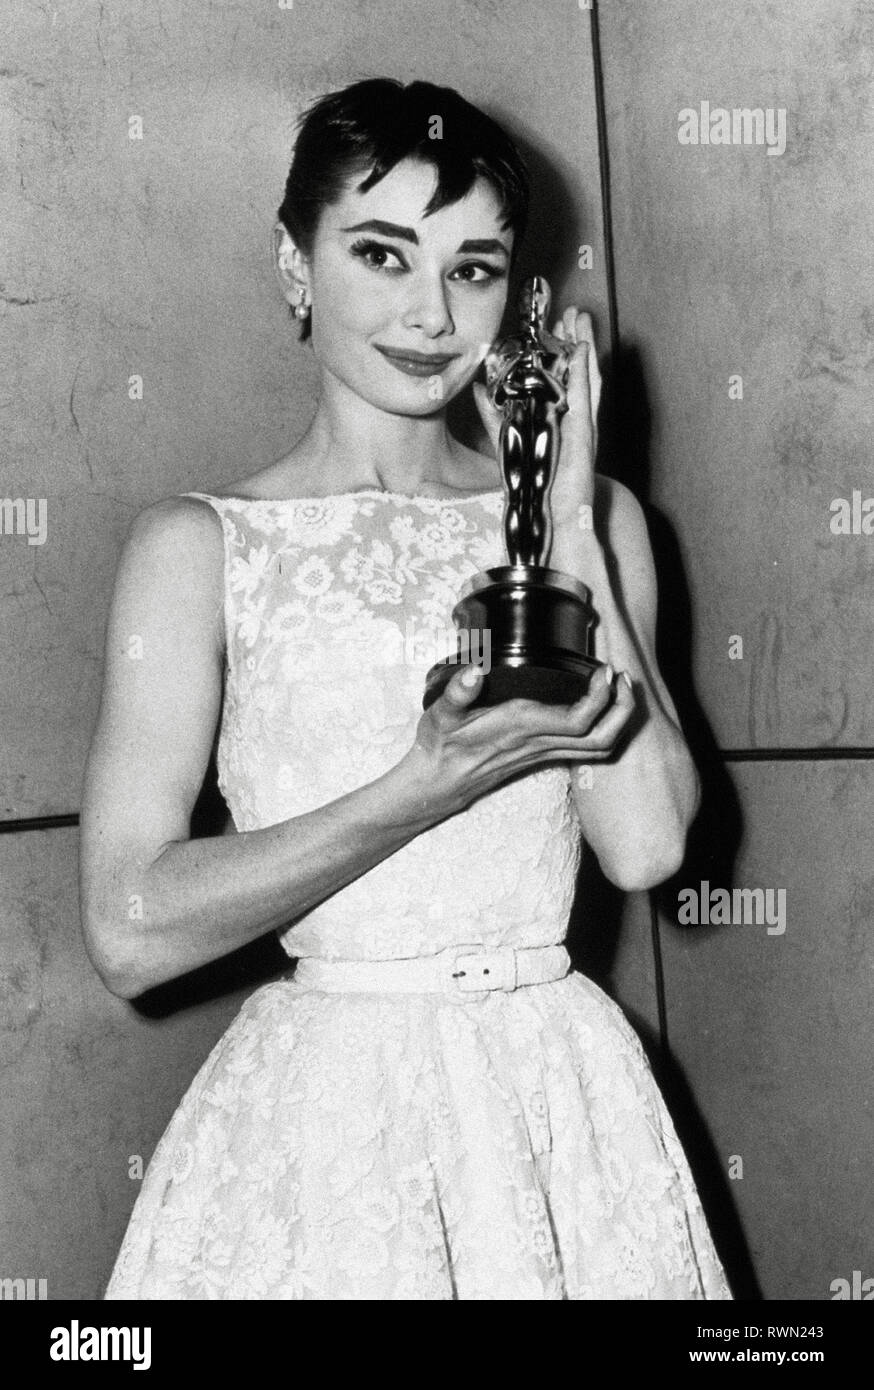 Audrey Hepburn wearing a white floral dress by Hubert de Givenchy at the 26th Annual Academy Awards held at the NBC Century Theatre in New York City on March 25, 1954. Hepburn won best actress for 'Roman Holiday'  File Reference # 33751 477THA Stock Photo